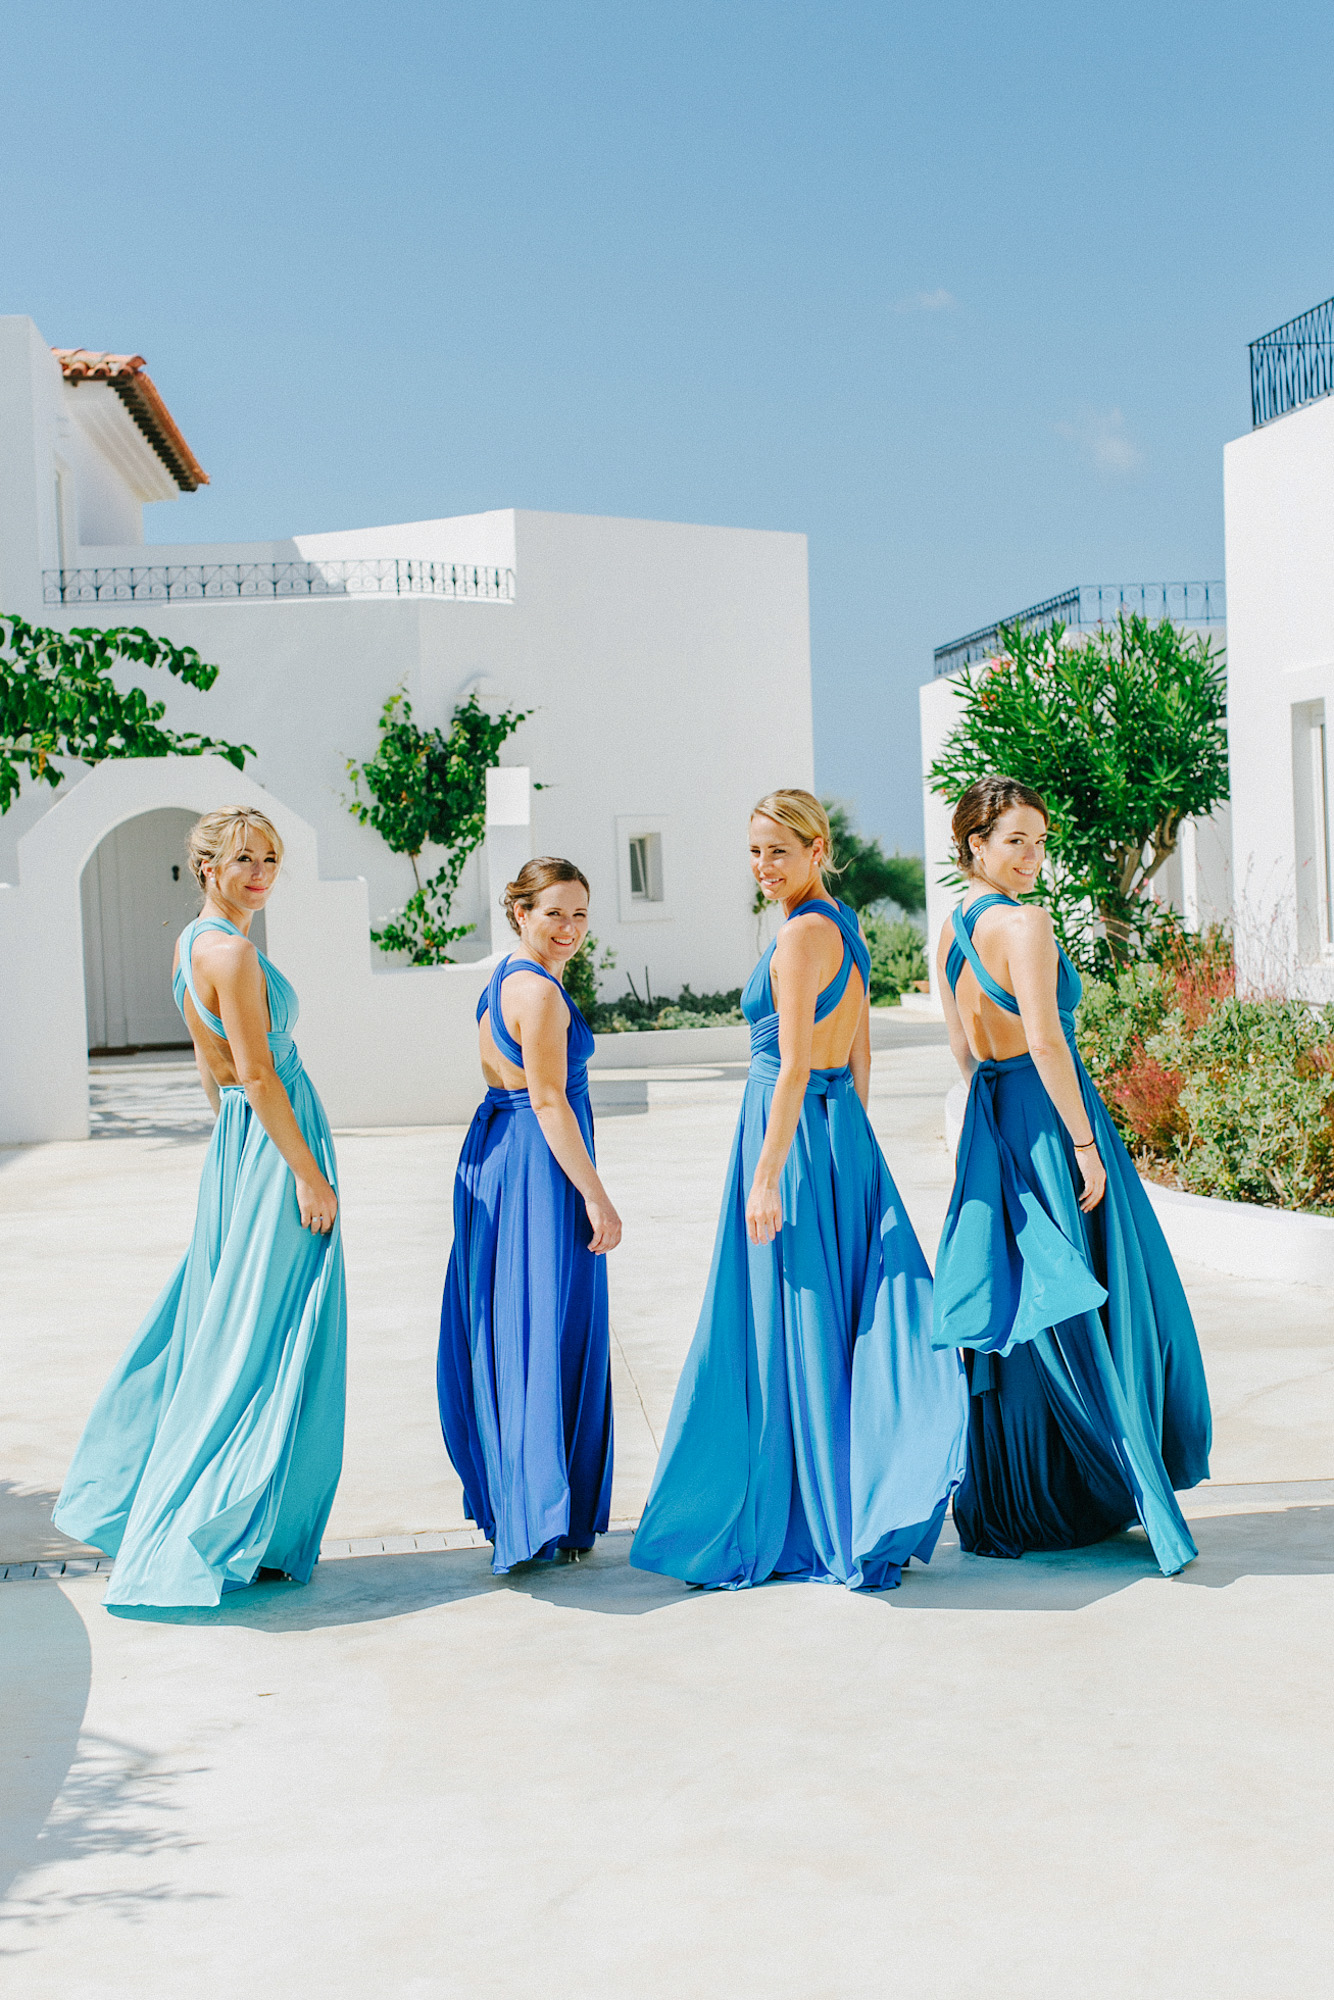 Professional portrait of four bridesmaids walking along Caramel hotel wearing mismatched dresses and looking at the wedding photographer smiling.